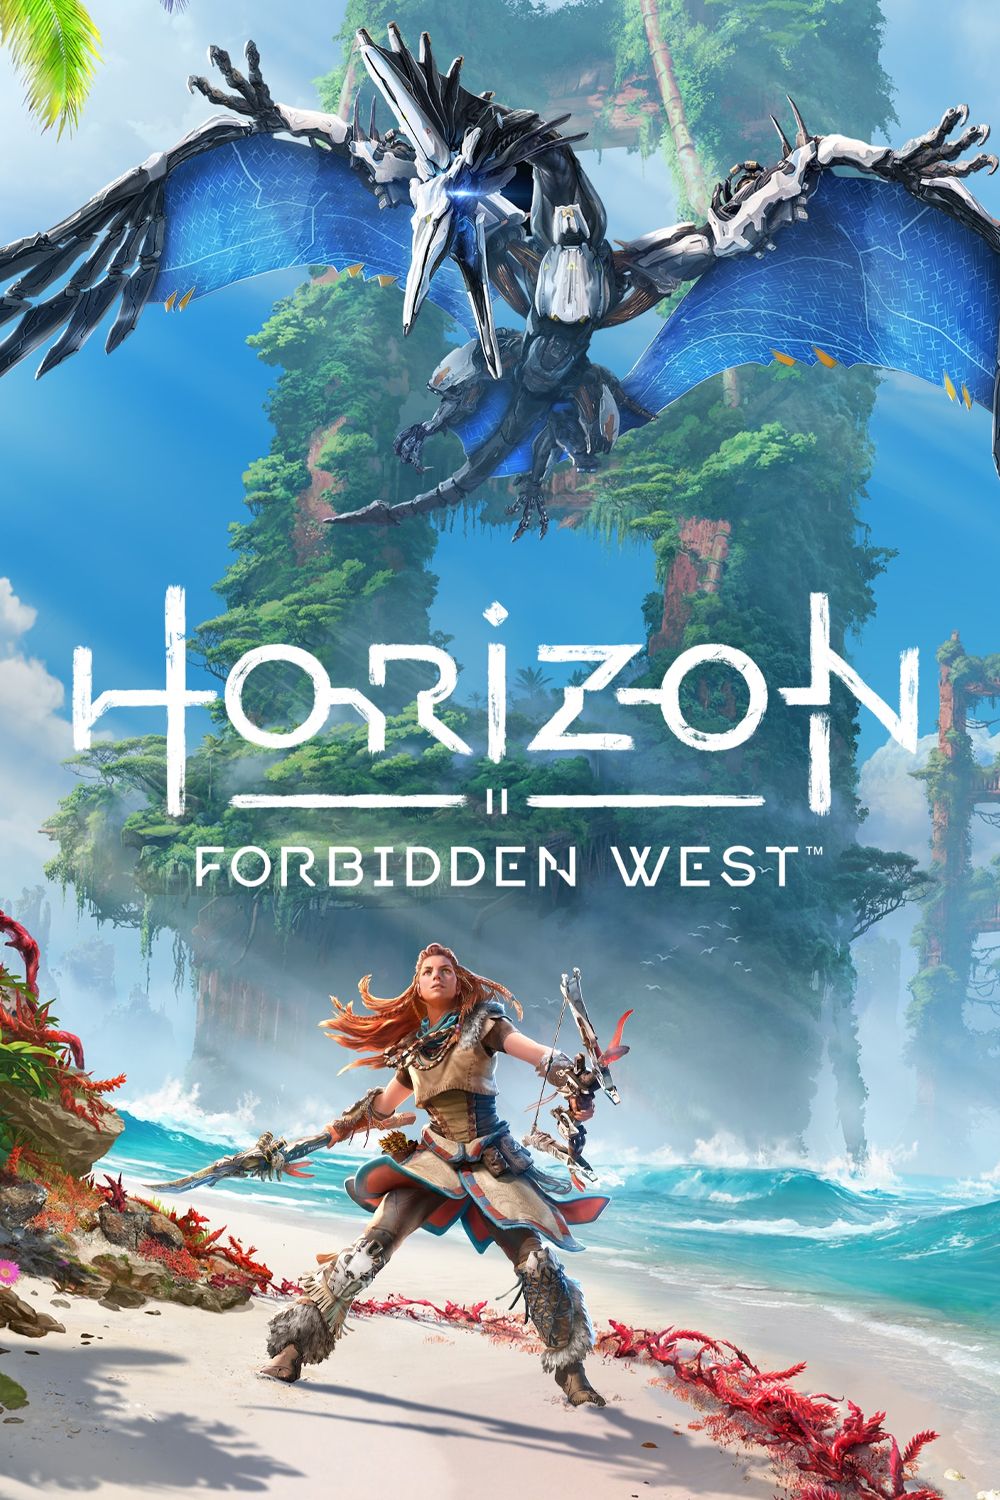 Steam Customers Are Loving the Horizon PC Port, However There’s One Recreation They Actually Need